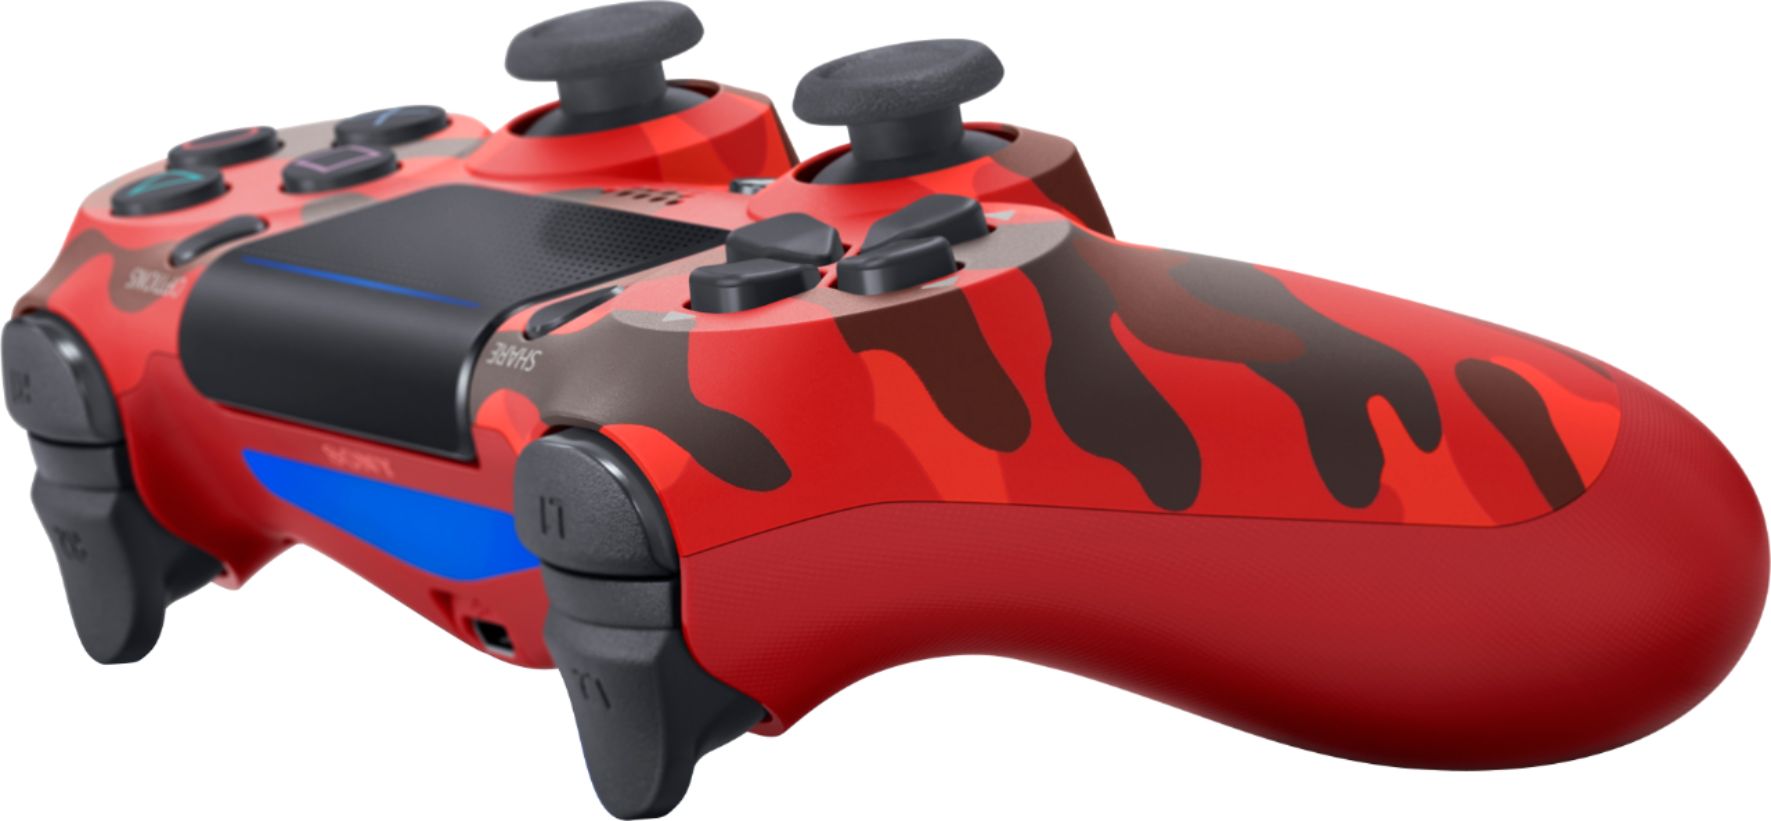 Best Buy Dualshock 4 Wireless Controller For Sony Playstation 4 Red Camouflage